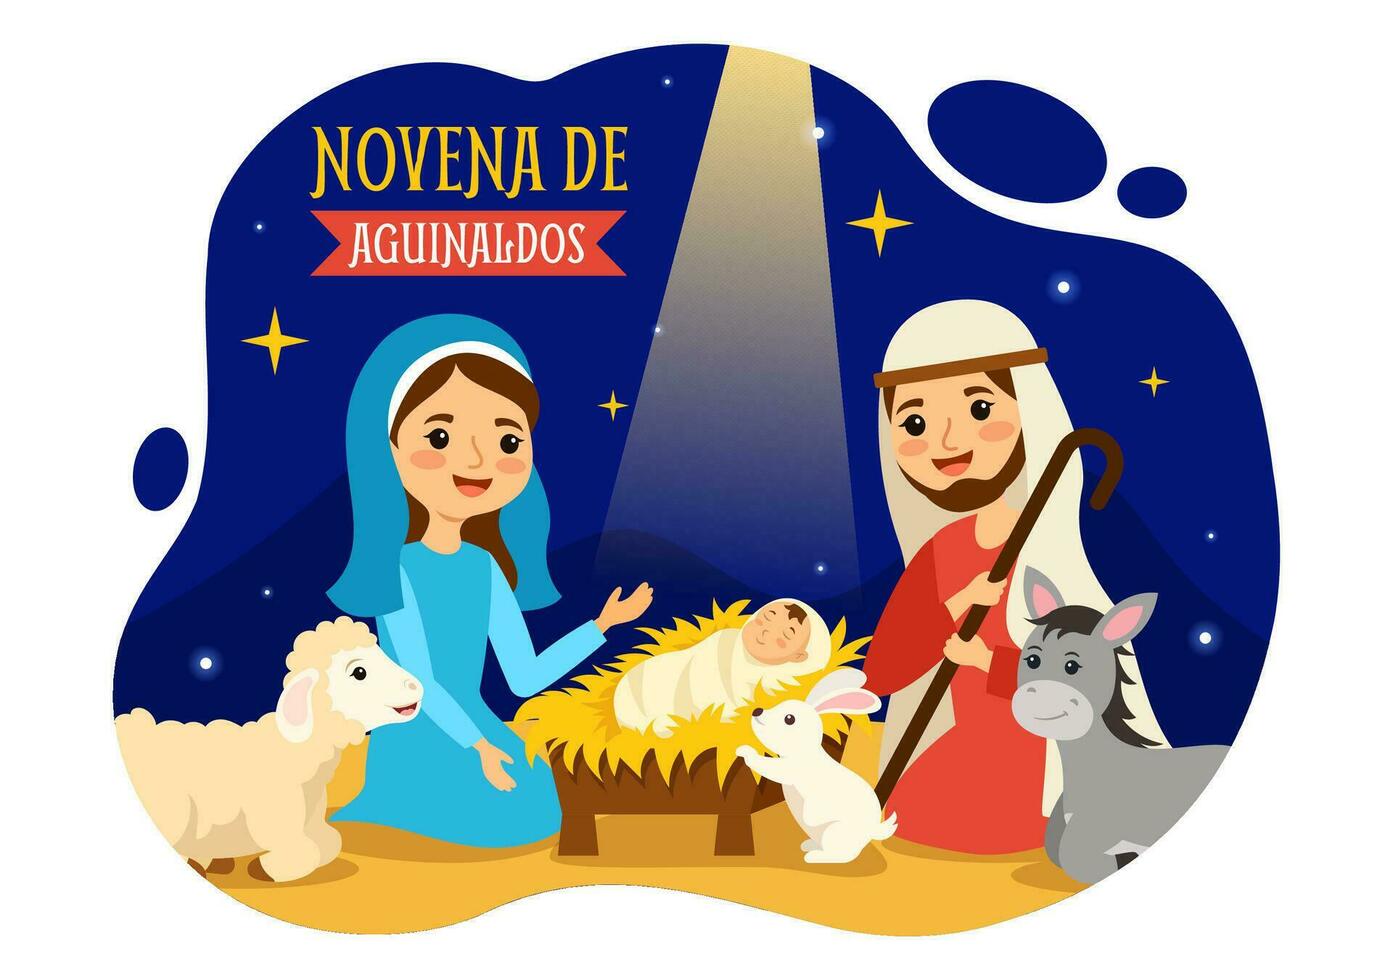 Novena De Aguinaldos Vector Illustration with Holiday Tradition for Families to Get Together at Christmas in Flat Cartoon Background Design